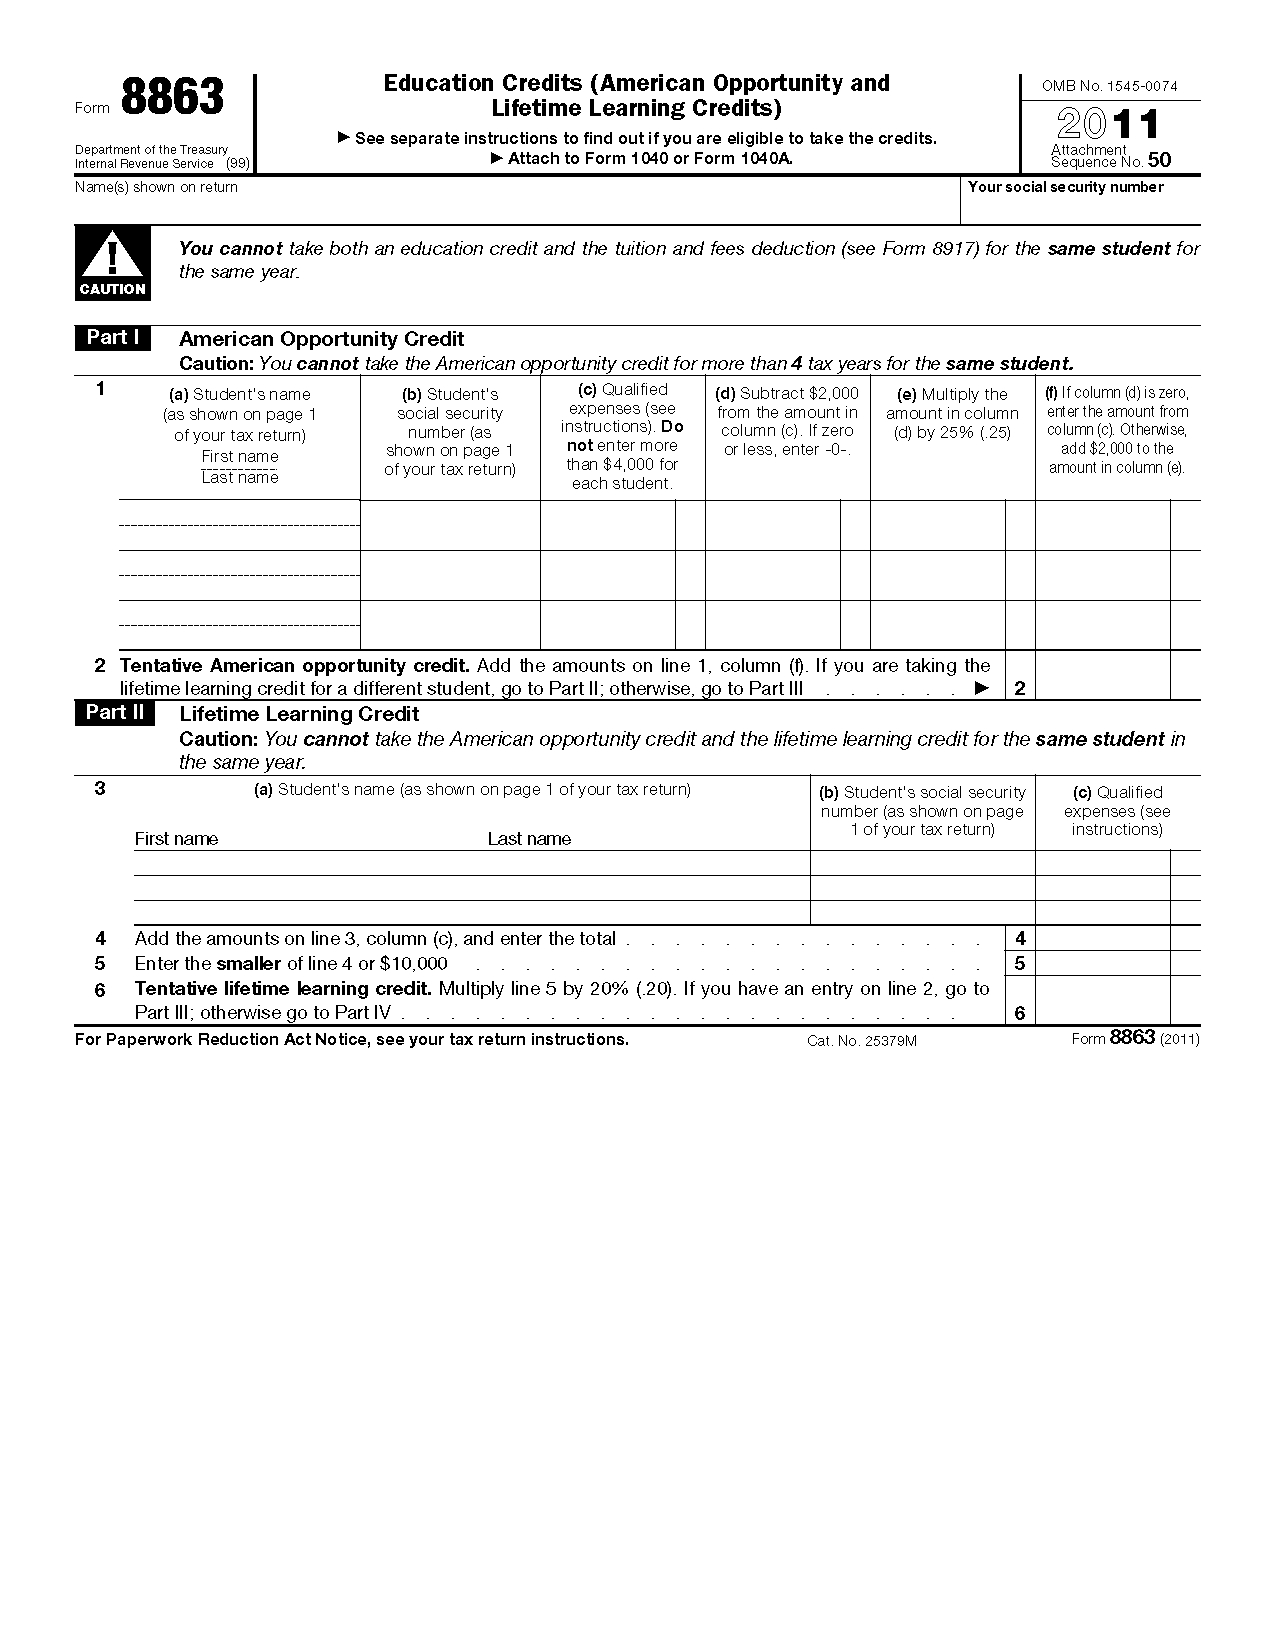 Tax Form 8863 Federal For 2016 Instructions 2015 2018